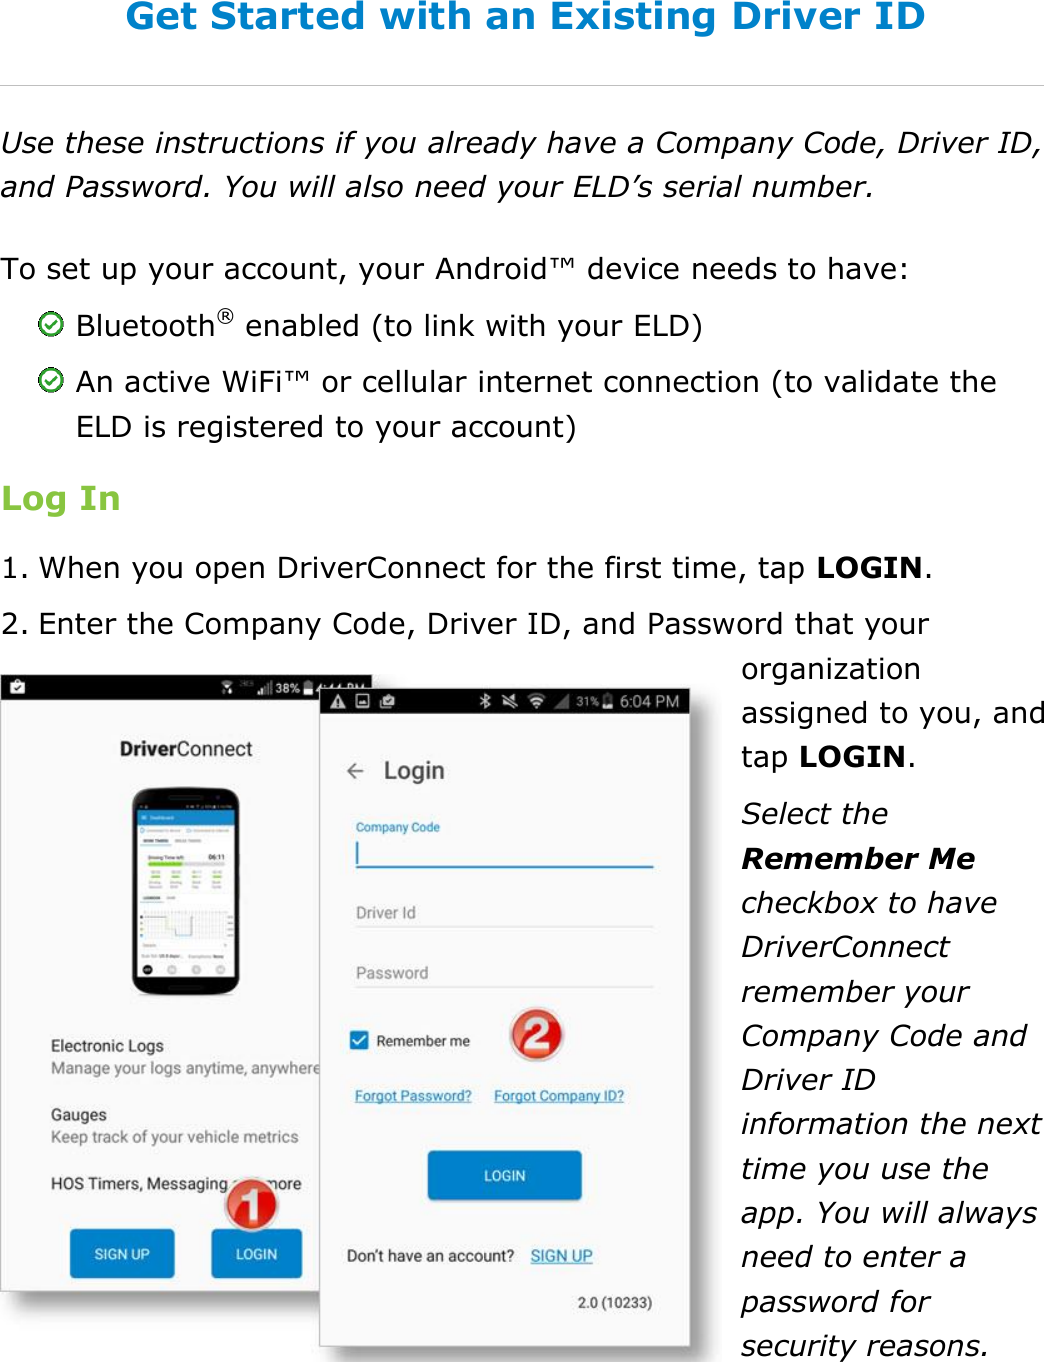 Set My Duty Status DriverConnect User Guide  14 © 2016-2017, Rand McNally, Inc. Get Started with an Existing Driver ID Use these instructions if you already have a Company Code, Driver ID, and Password. You will also need your ELD’s serial number. To set up your account, your Android™ device needs to have:  Bluetooth® enabled (to link with your ELD)  An active WiFi™ or cellular internet connection (to validate the ELD is registered to your account) Log In 1. When you open DriverConnect for the first time, tap LOGIN. 2. Enter the Company Code, Driver ID, and Password that your organization assigned to you, and tap LOGIN. Select the Remember Me checkbox to have DriverConnect remember your Company Code and Driver ID information the next time you use the app. You will always need to enter a password for security reasons.    